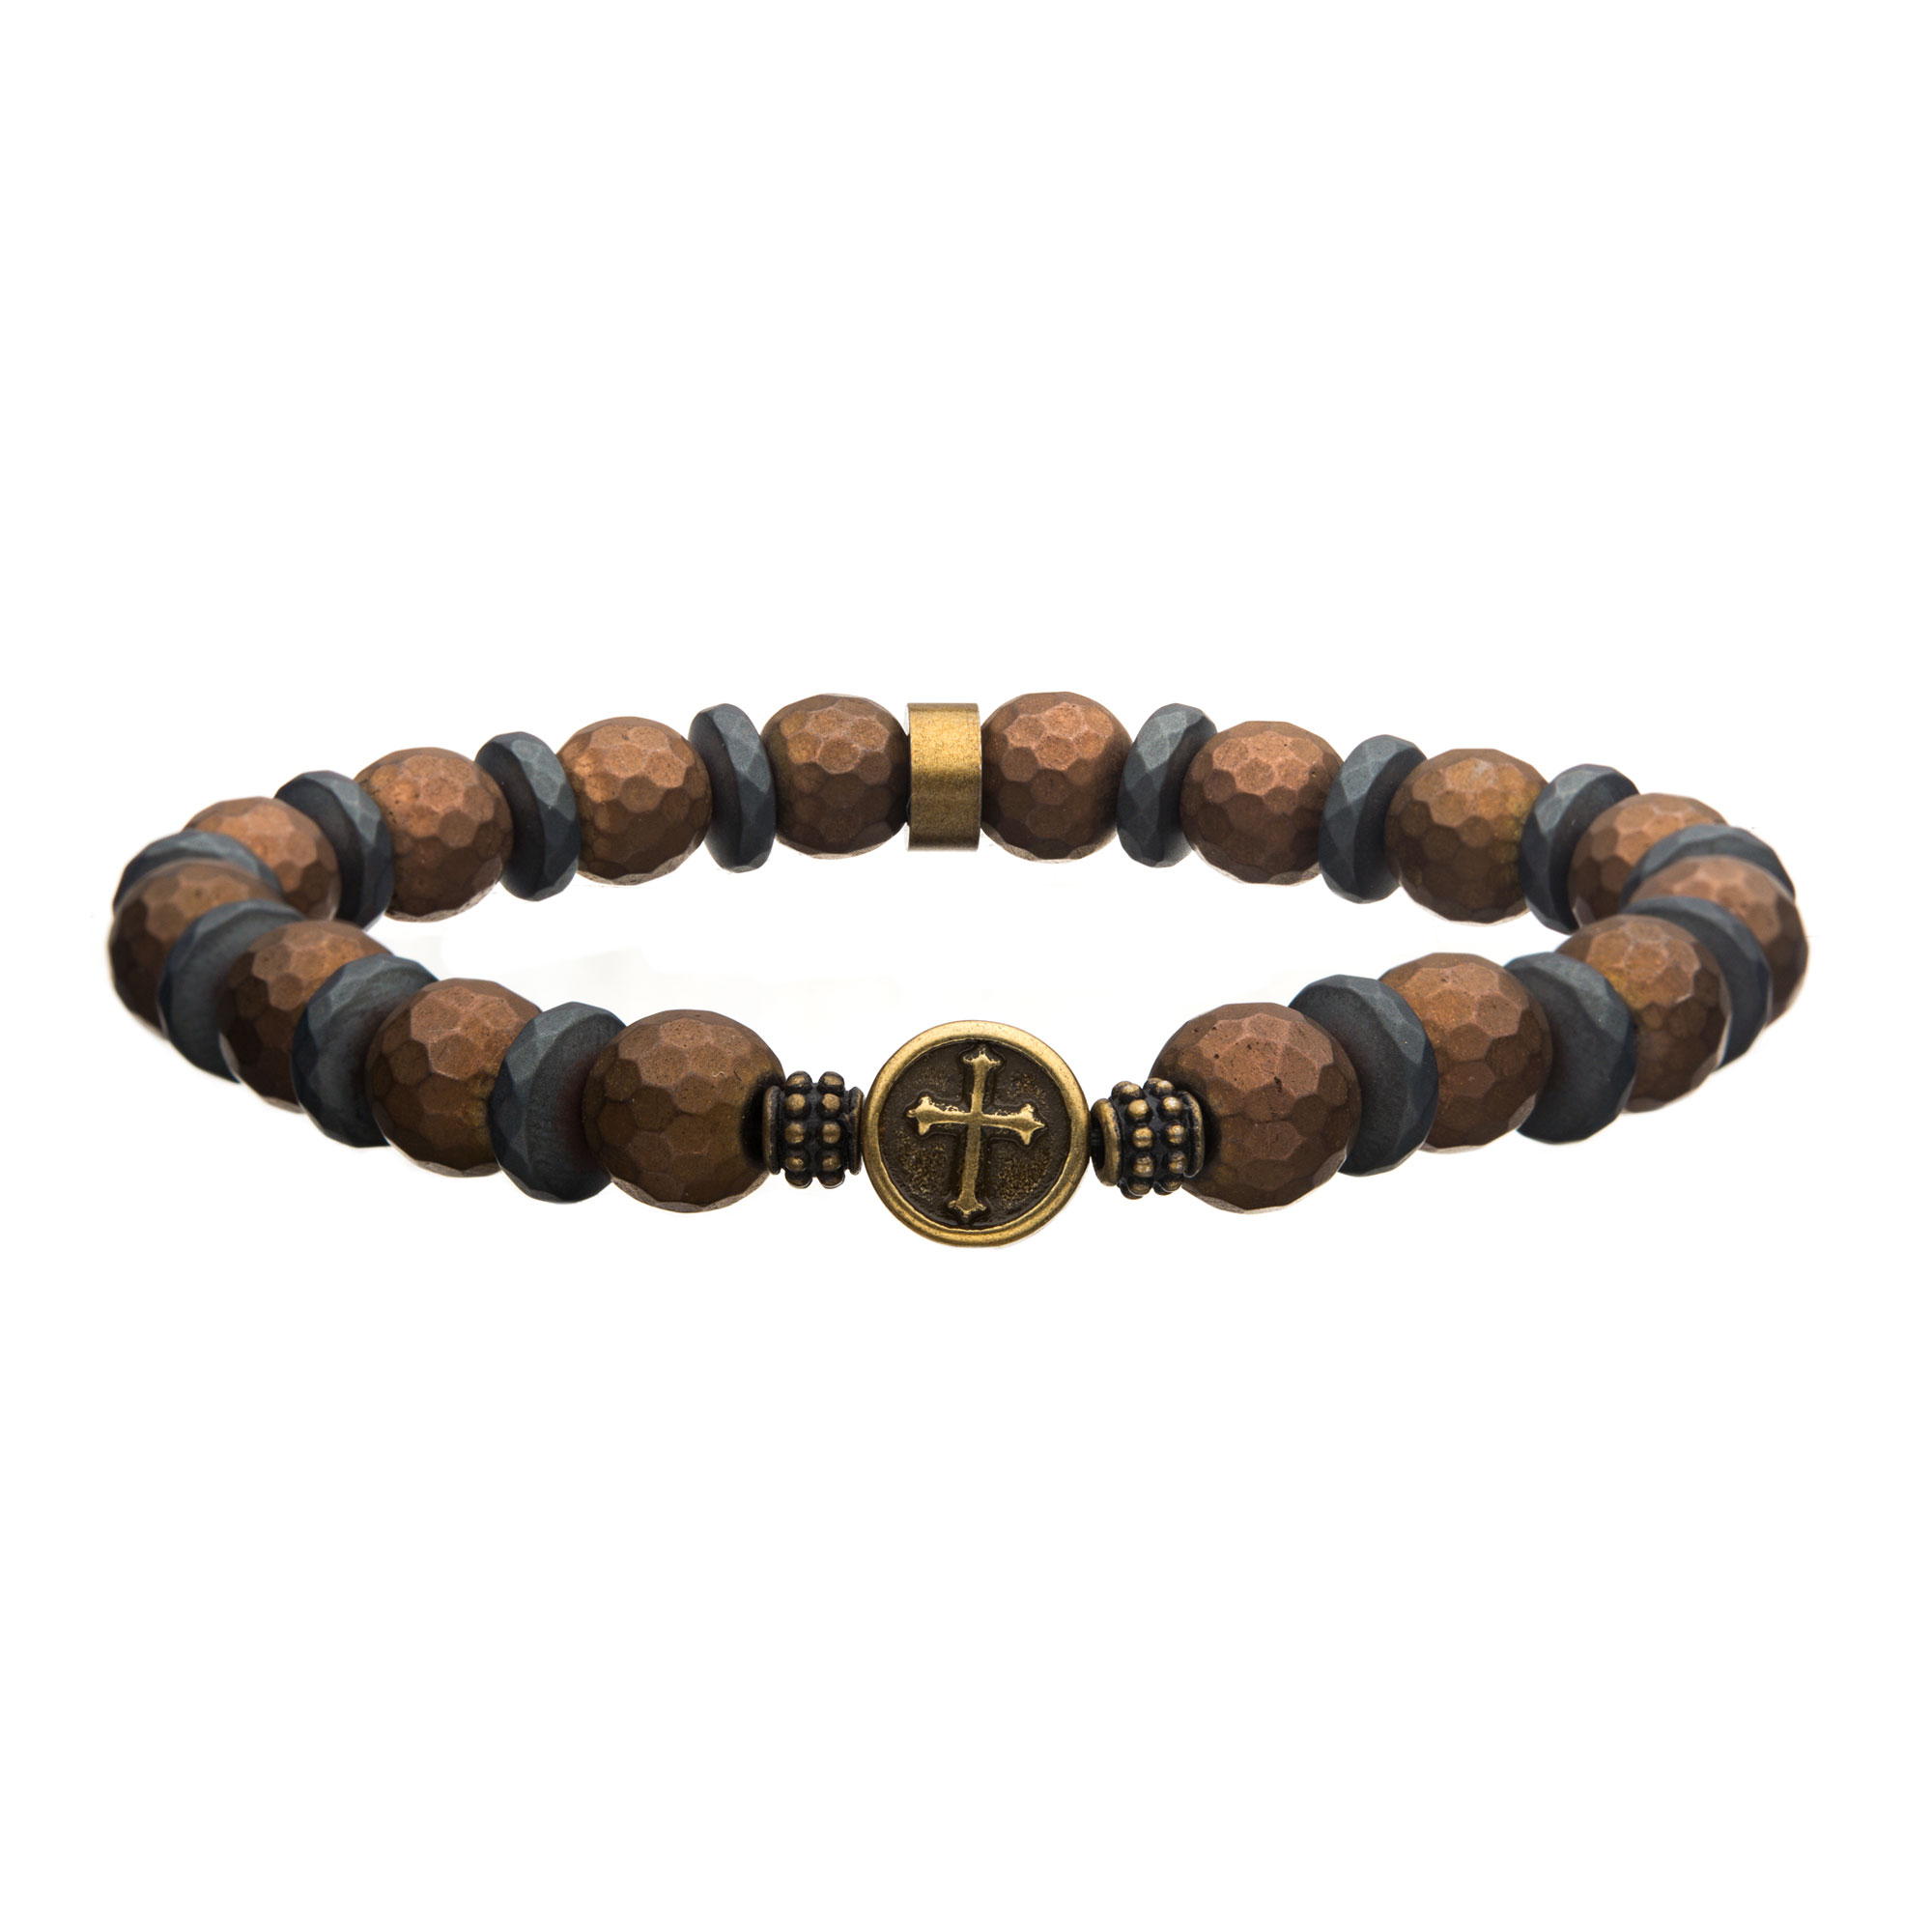 10mm Hematite Stone with Coppertone Silicone String Bracelet Lewis Jewelers, Inc. Ansonia, CT